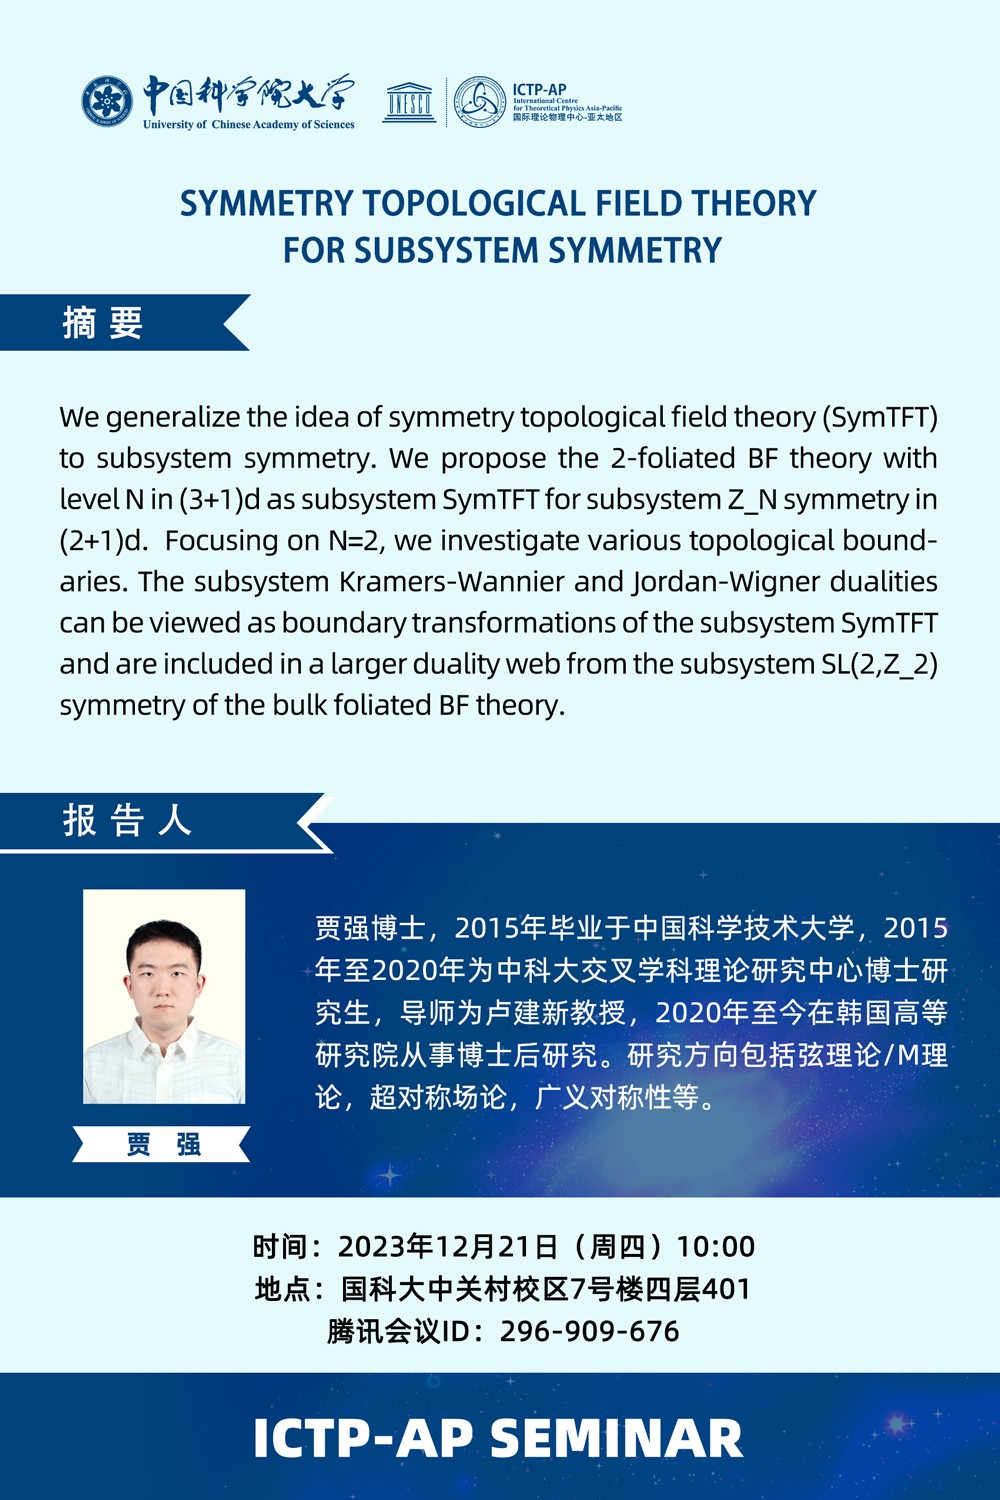 ICTP-AP Seminar: Symmetry Topological field theory for Subsystem symmetry